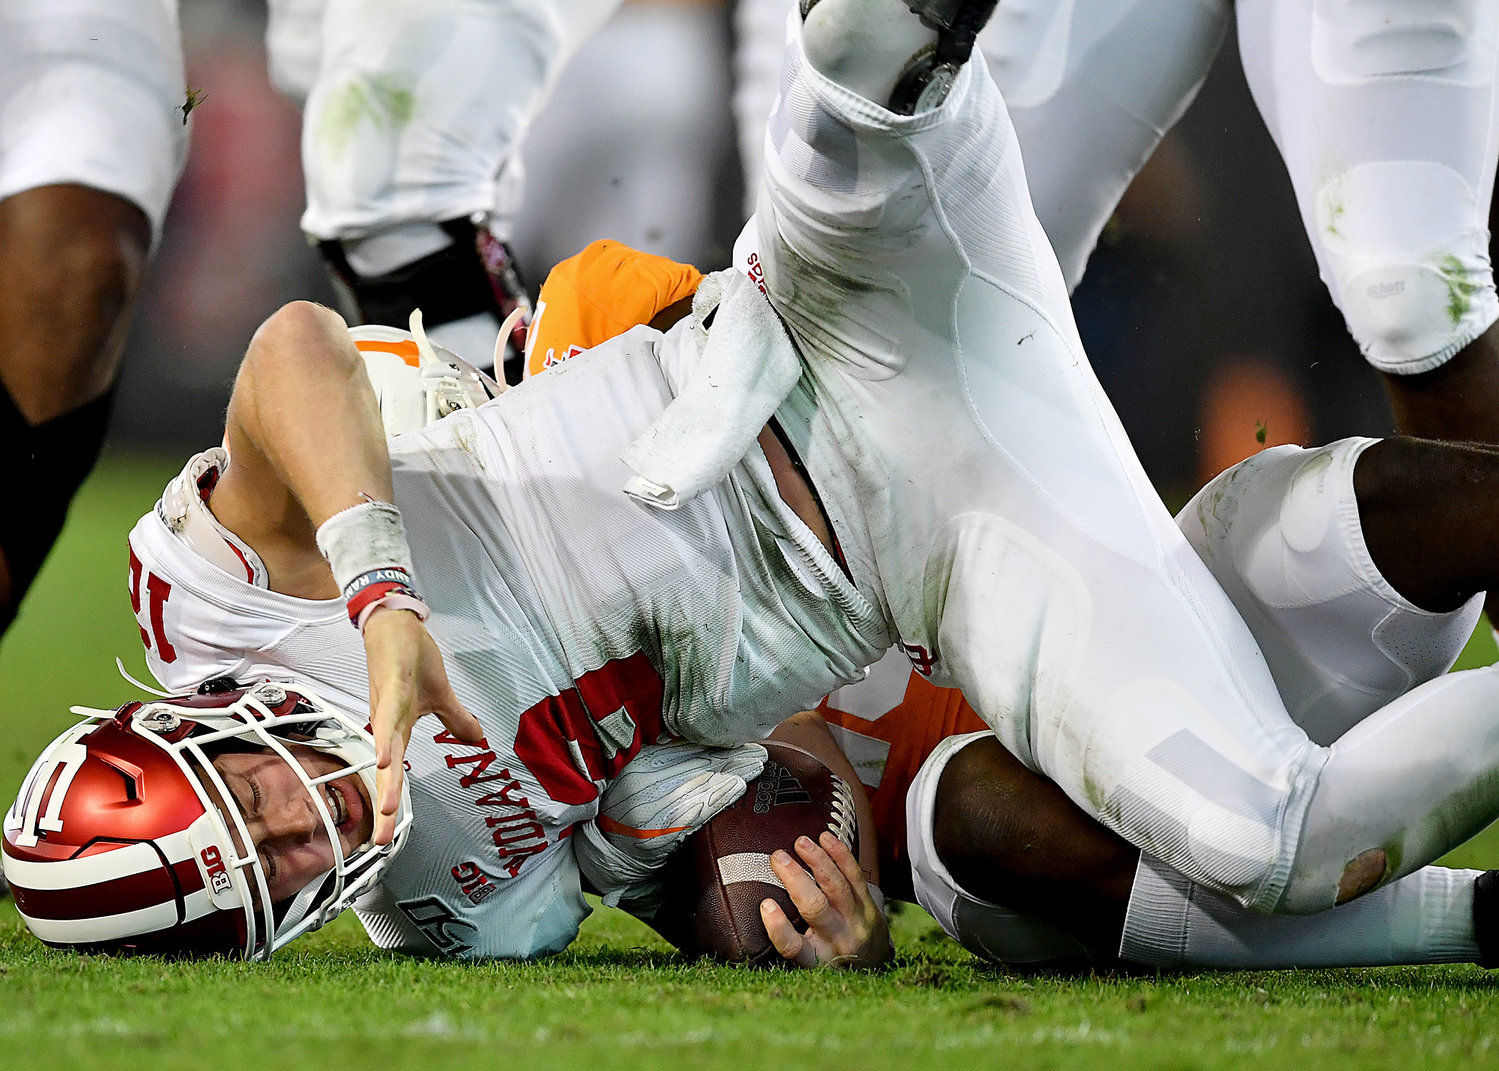 Tennessee Volunteers linebacker Darrell Taylor (19) sacks Indiana Hoosiers quarterback Peyton Ramsey (12) in the first half of the Gator Bowl NCAA football game Thursday, January 2, 2020, at TIAA Bank Field in Jacksonville, Fla.